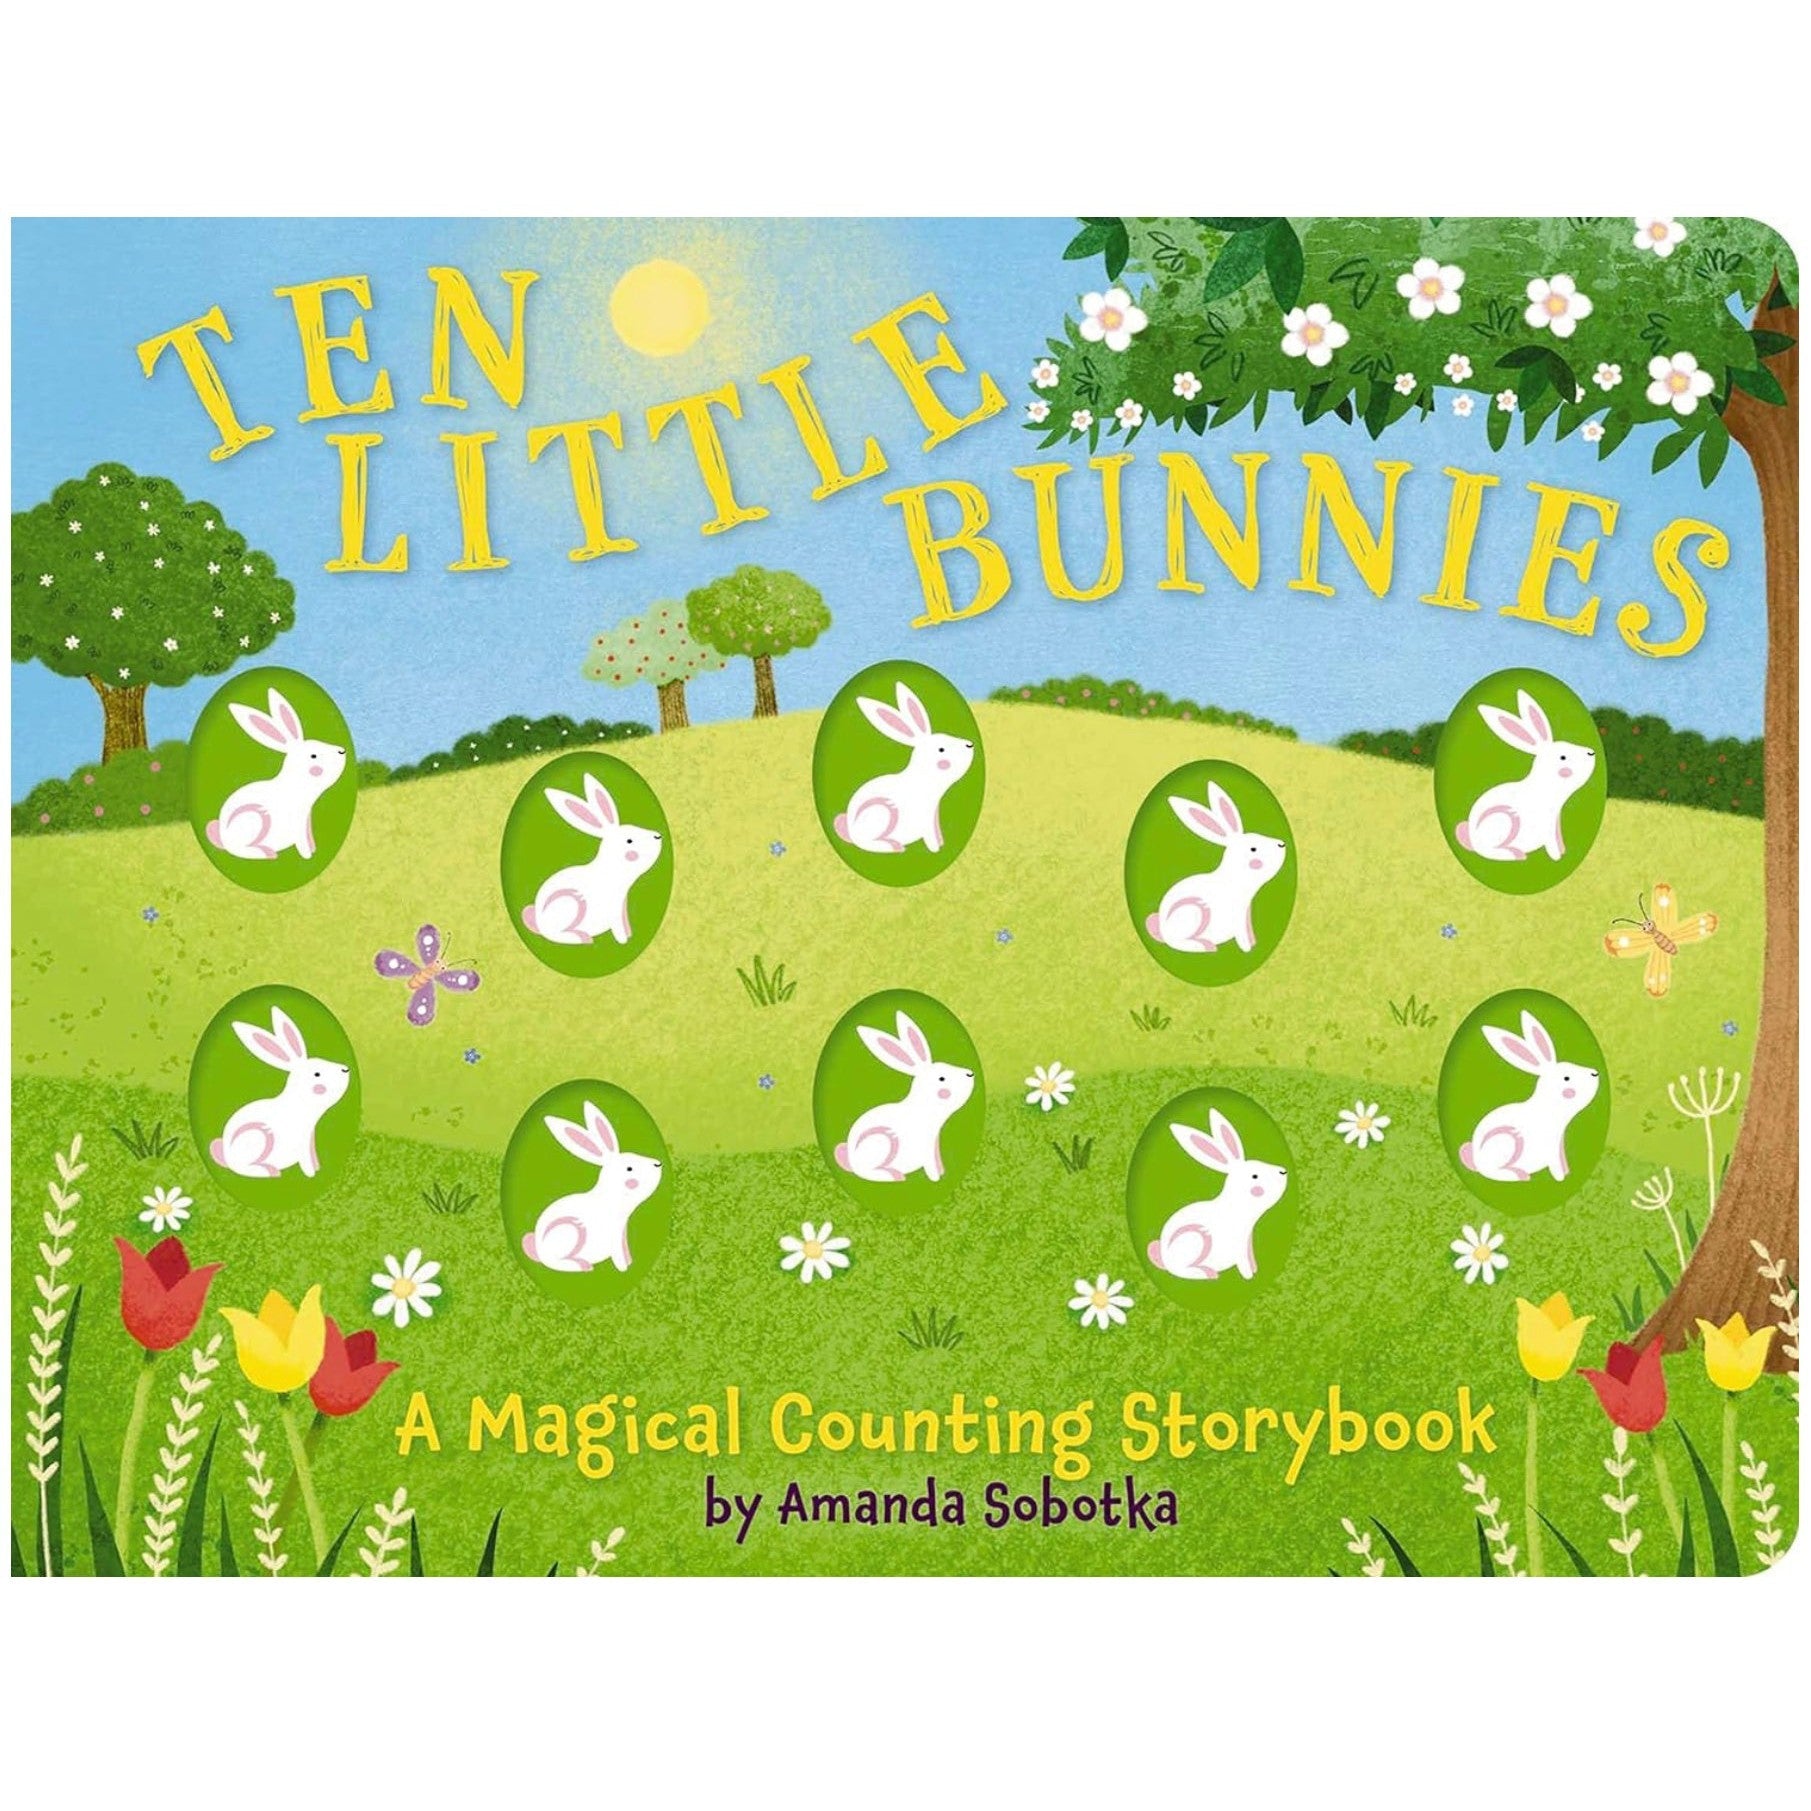 Harper Collins: Ten Little Bunnies: A Magical Counting Storybook-HARPER COLLINS PUBLISHERS-Little Giant Kidz